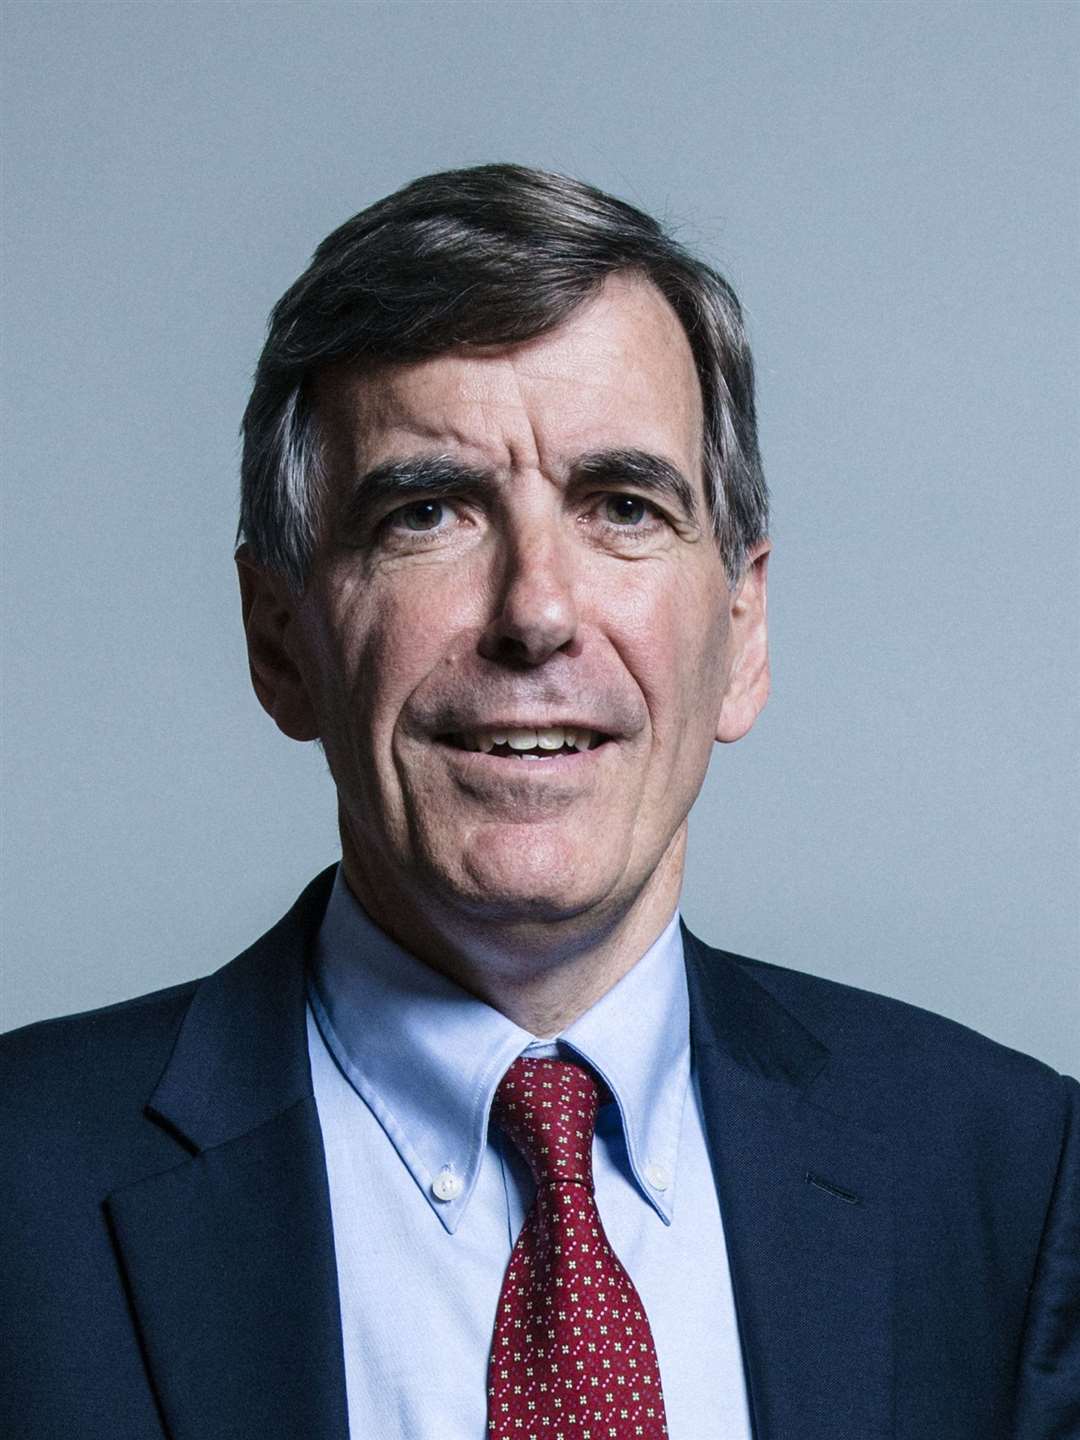 Minister for Welfare Delivery David Rutley MP.